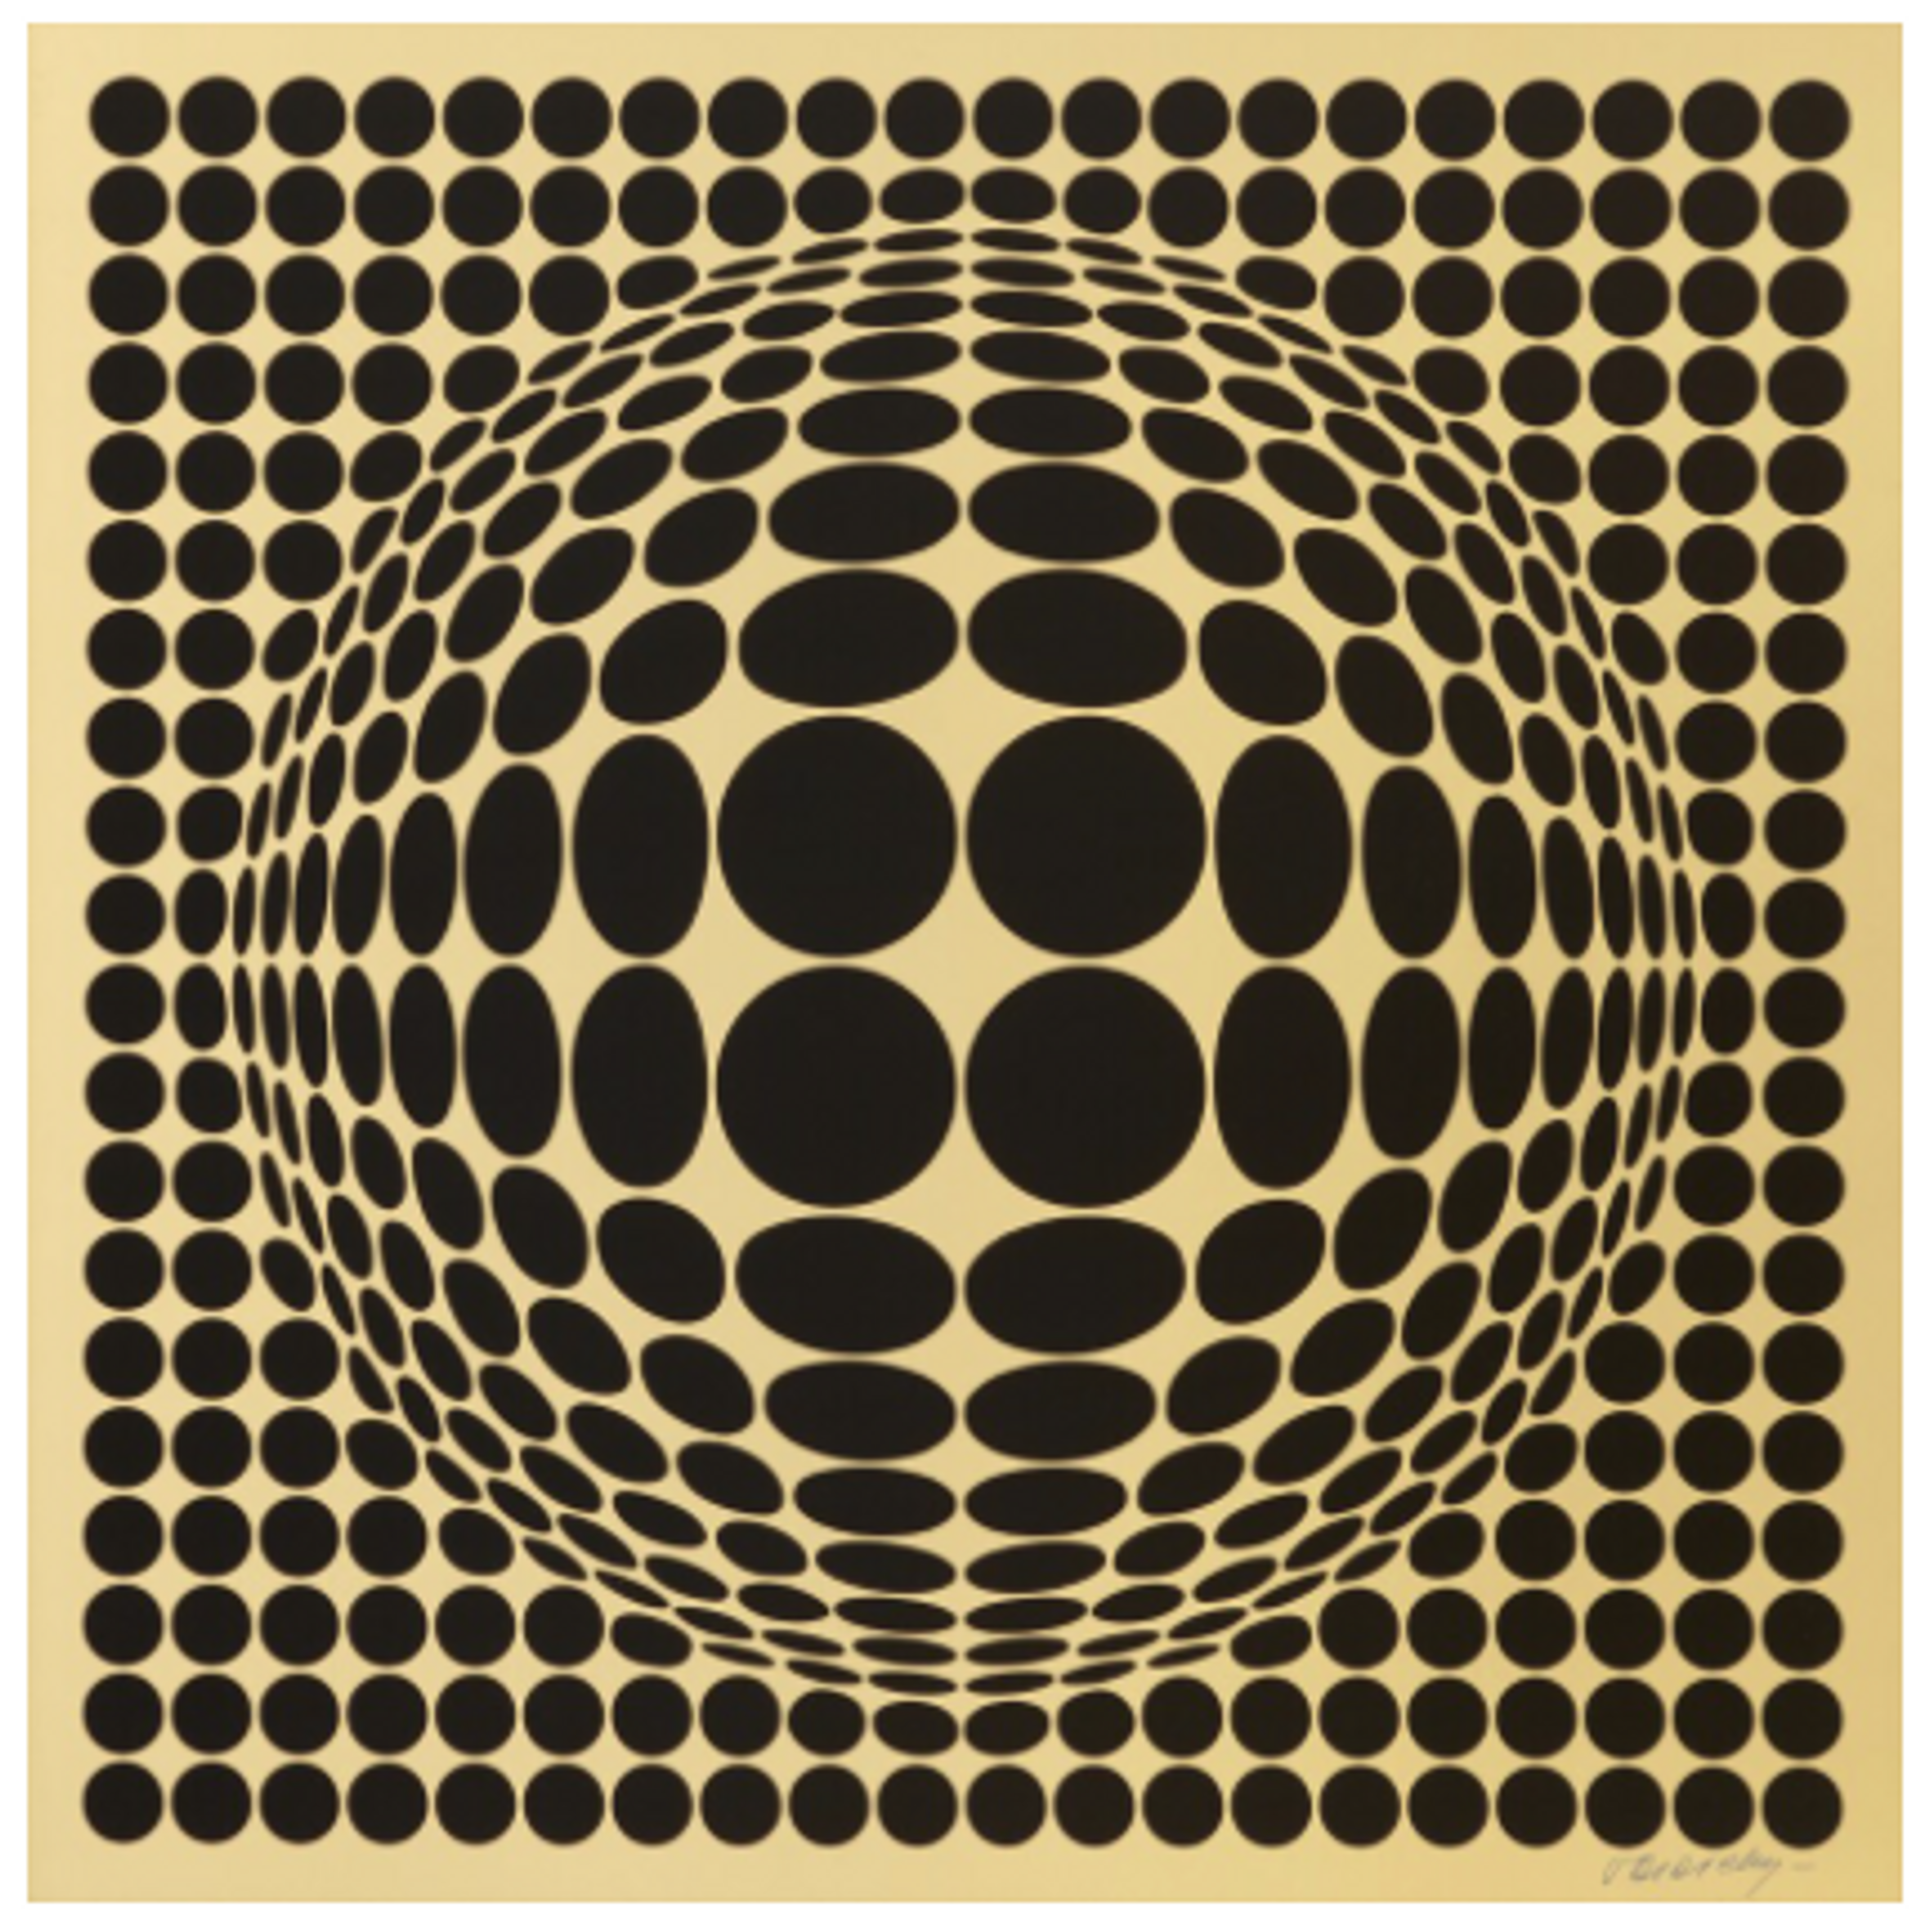 Victor Vasarely - Abstract Composition for Sale